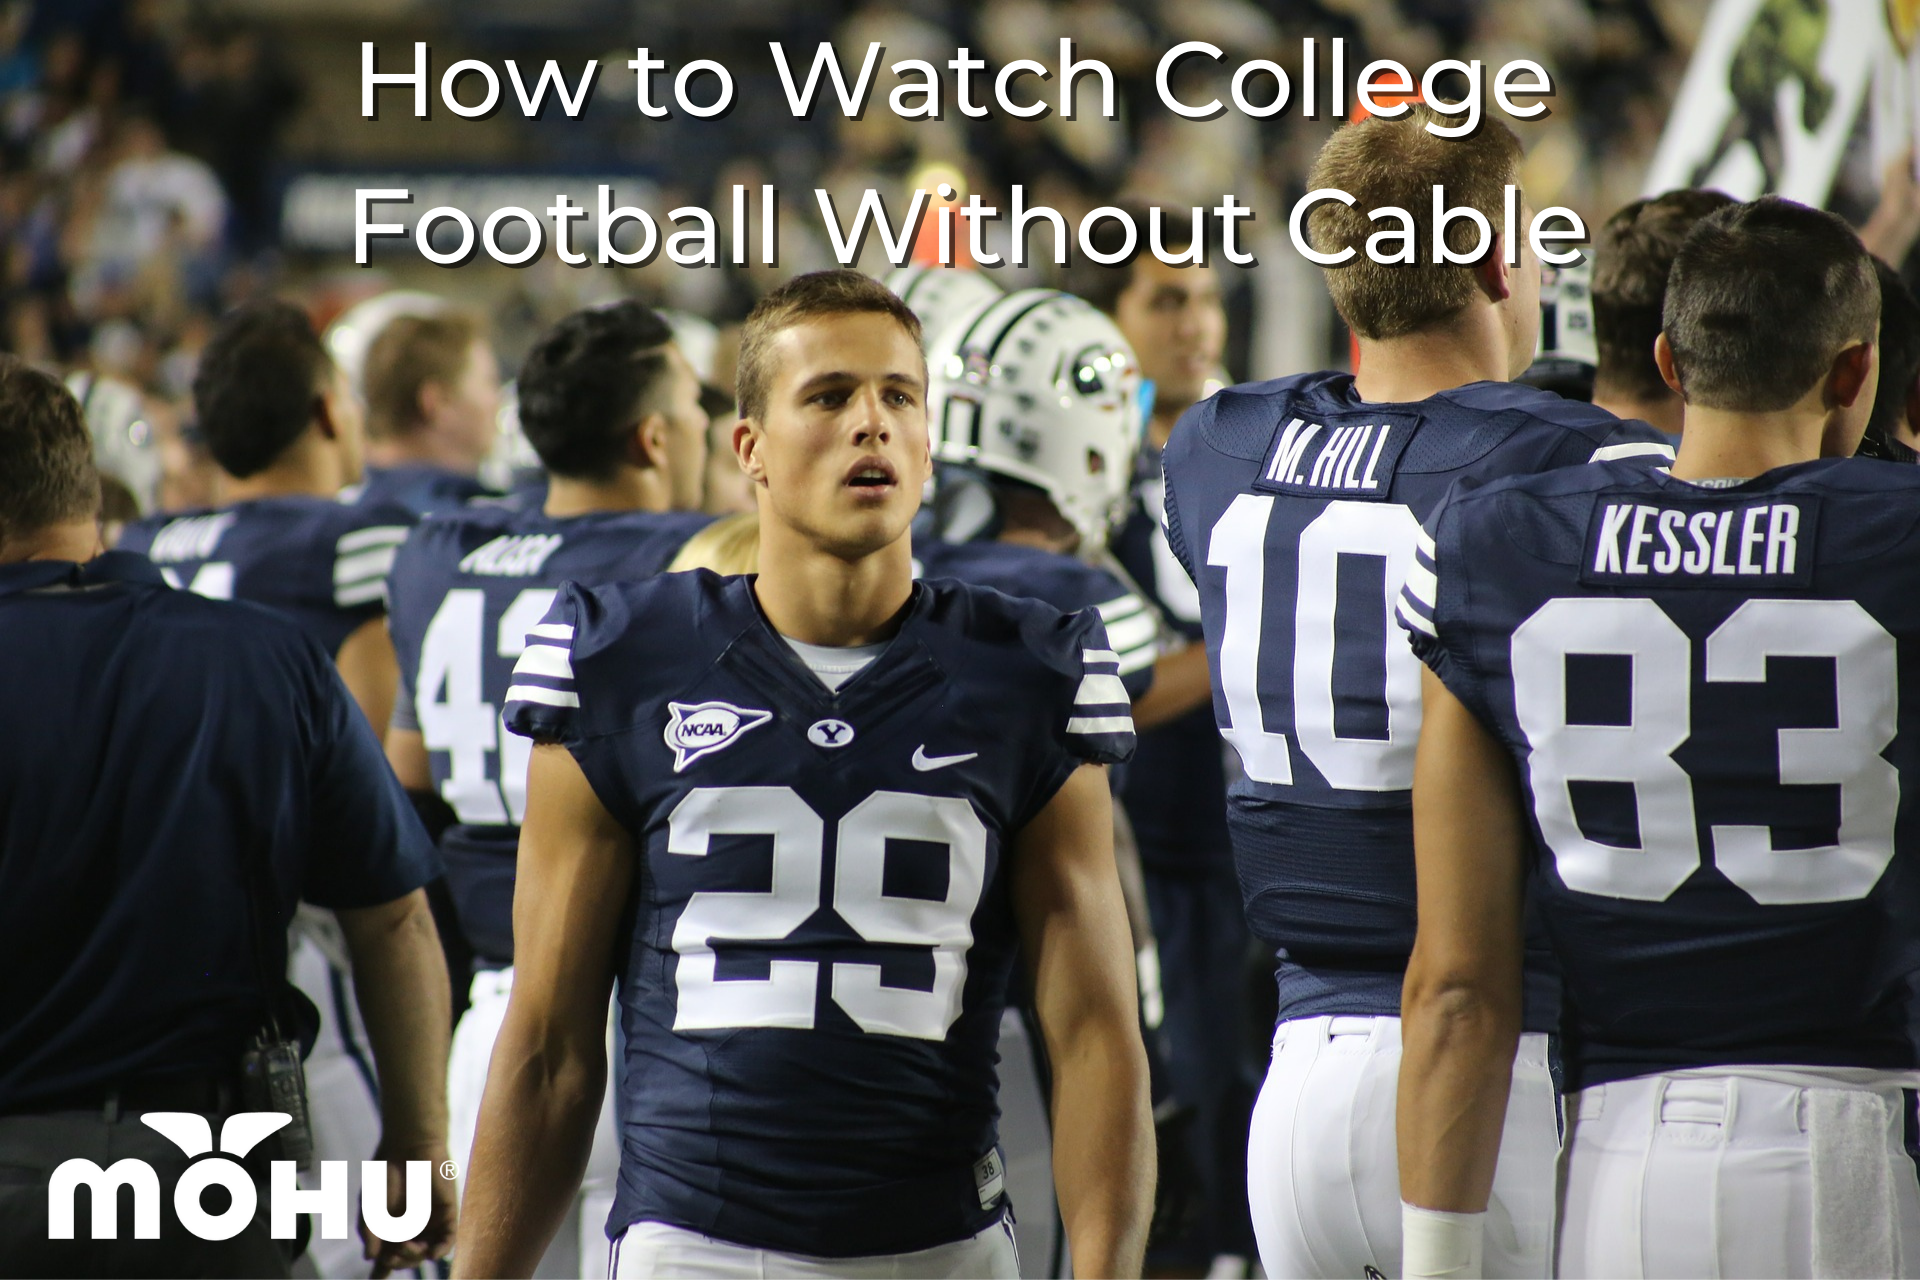 College football players standing on the field, How to Watch College Football Without Cable, mohu logo